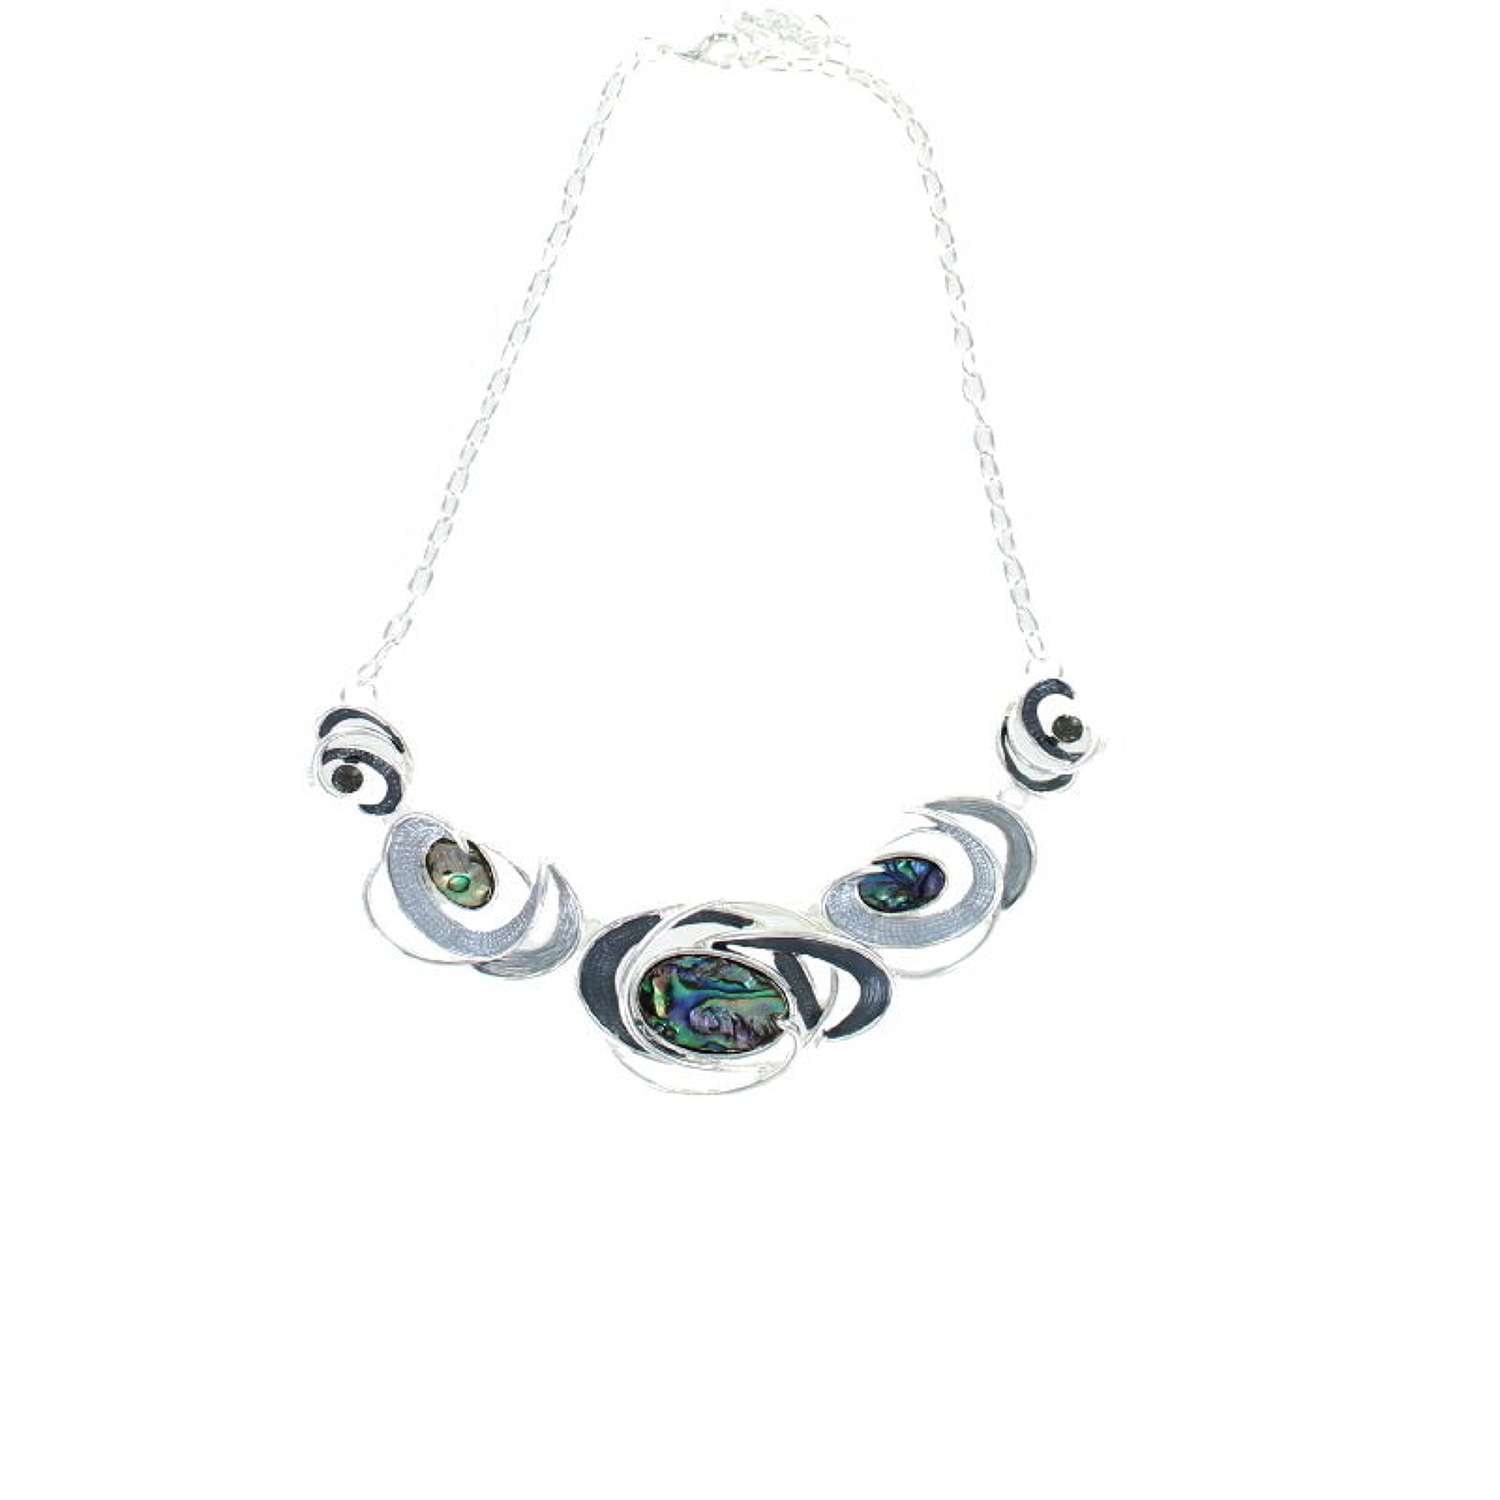 Abalone and enamel detail necklace.